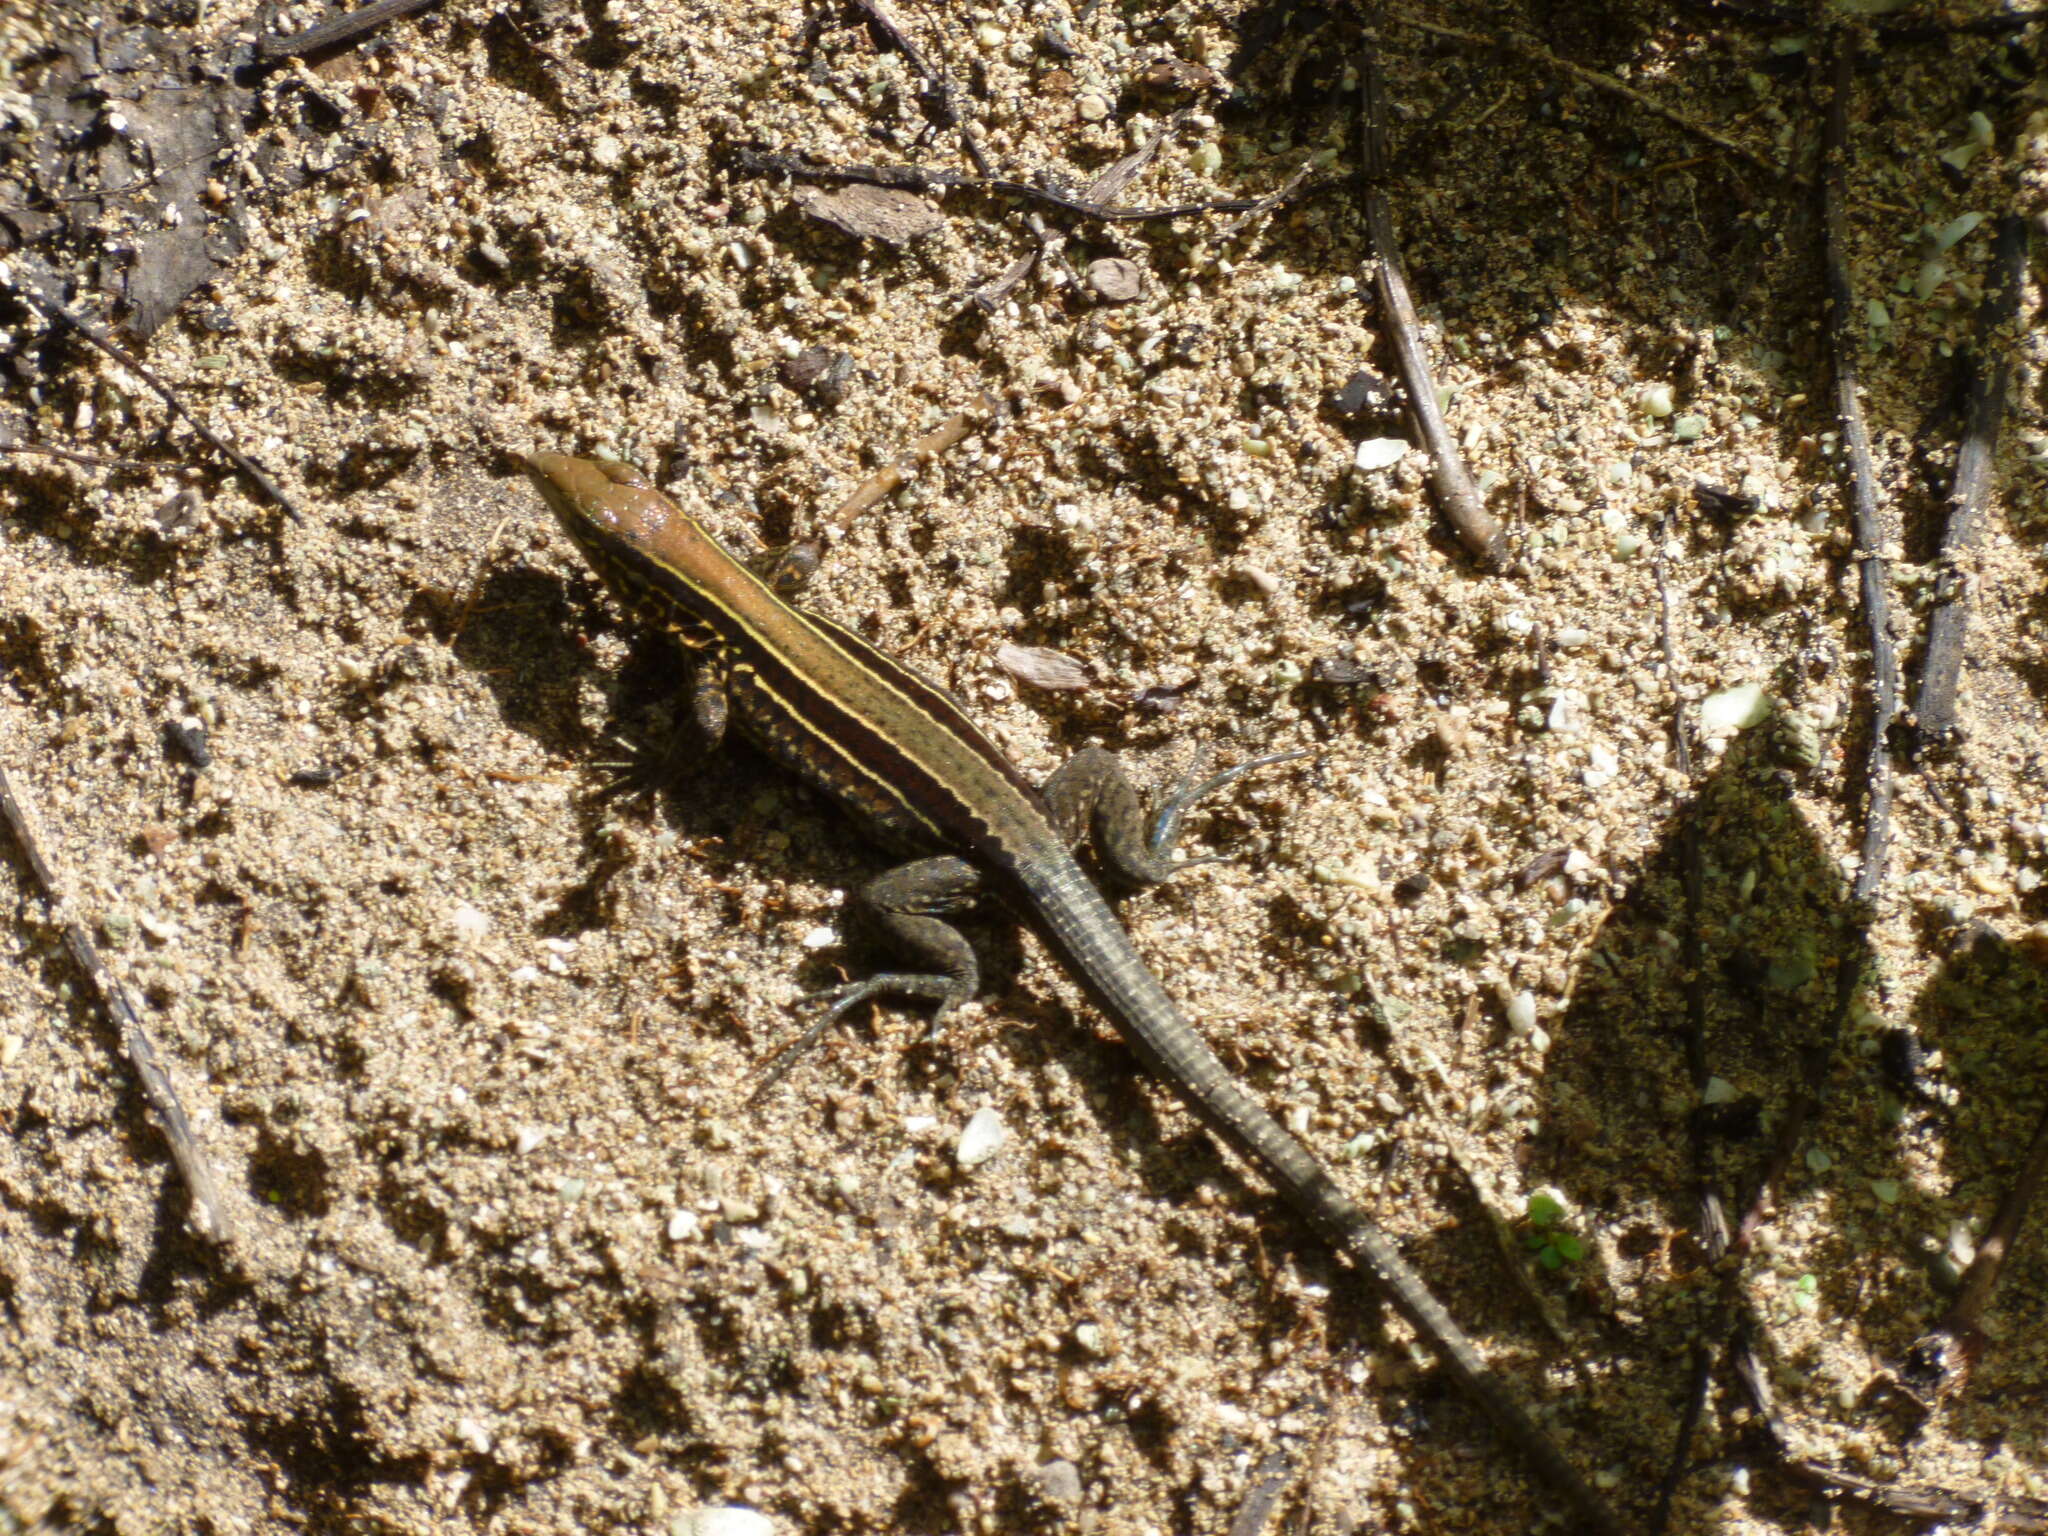 Image of Four-lined Ameiva